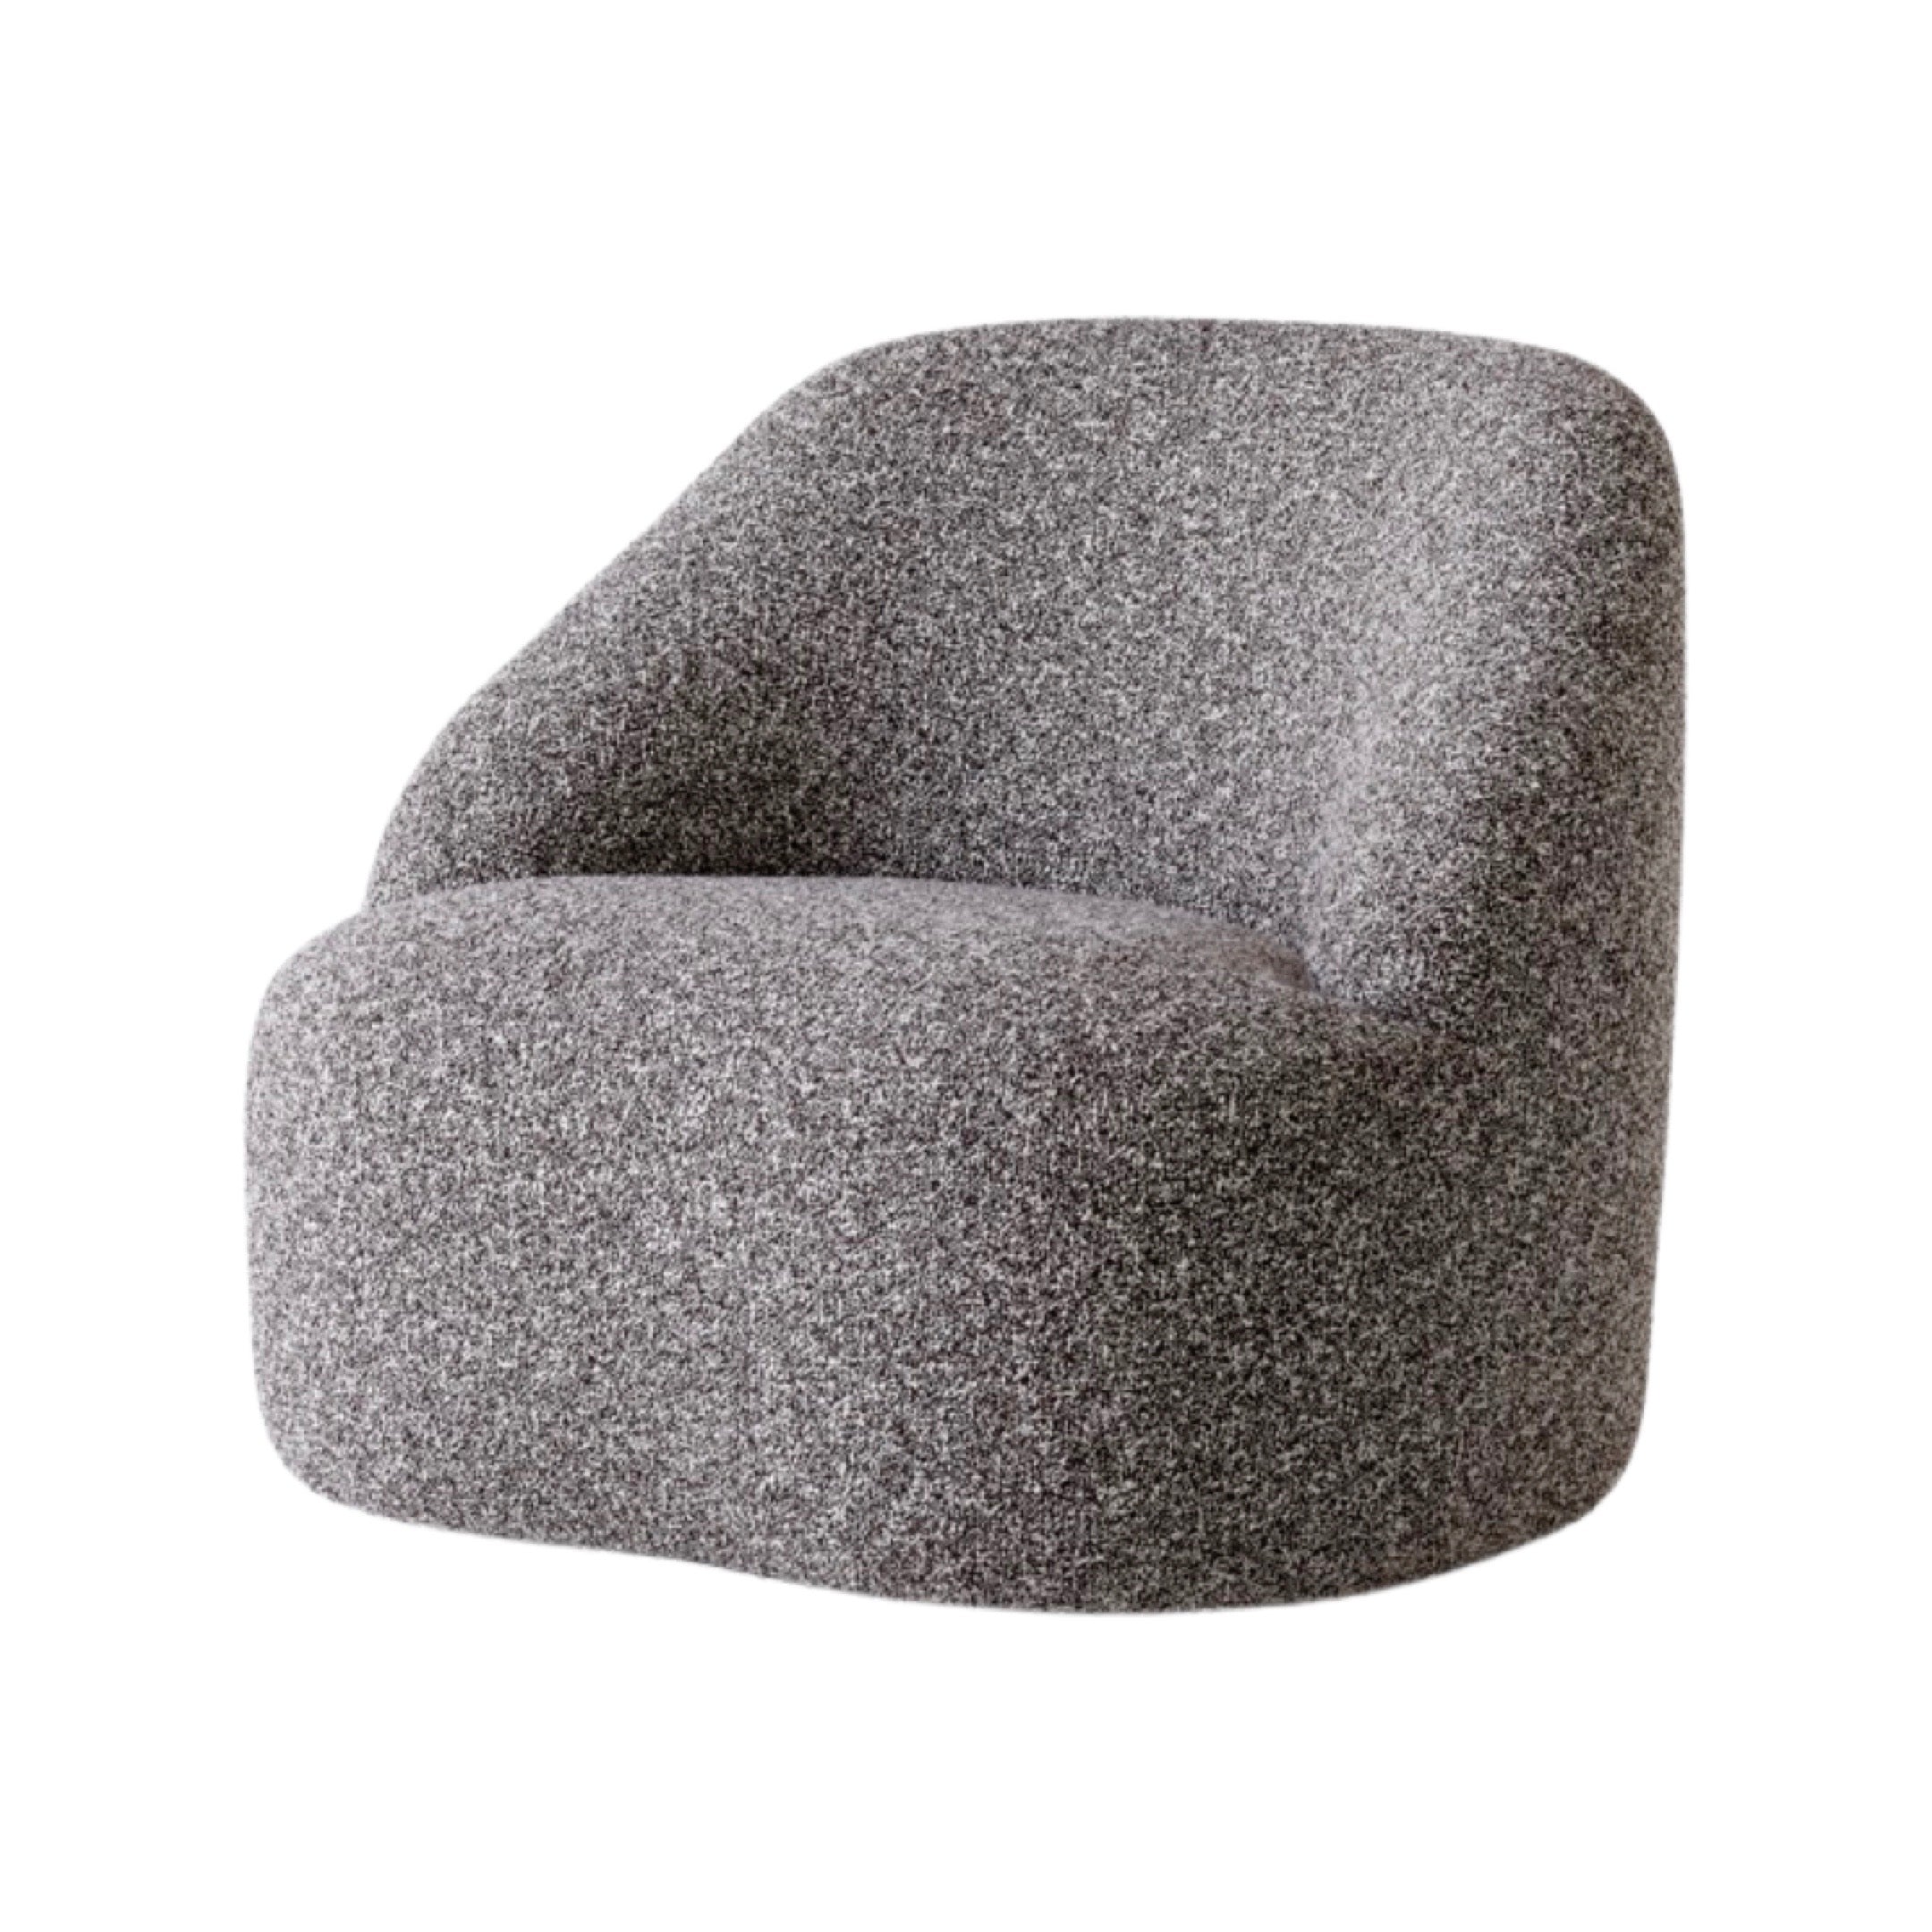 &Tradition Margas Lounge Chair - LC2